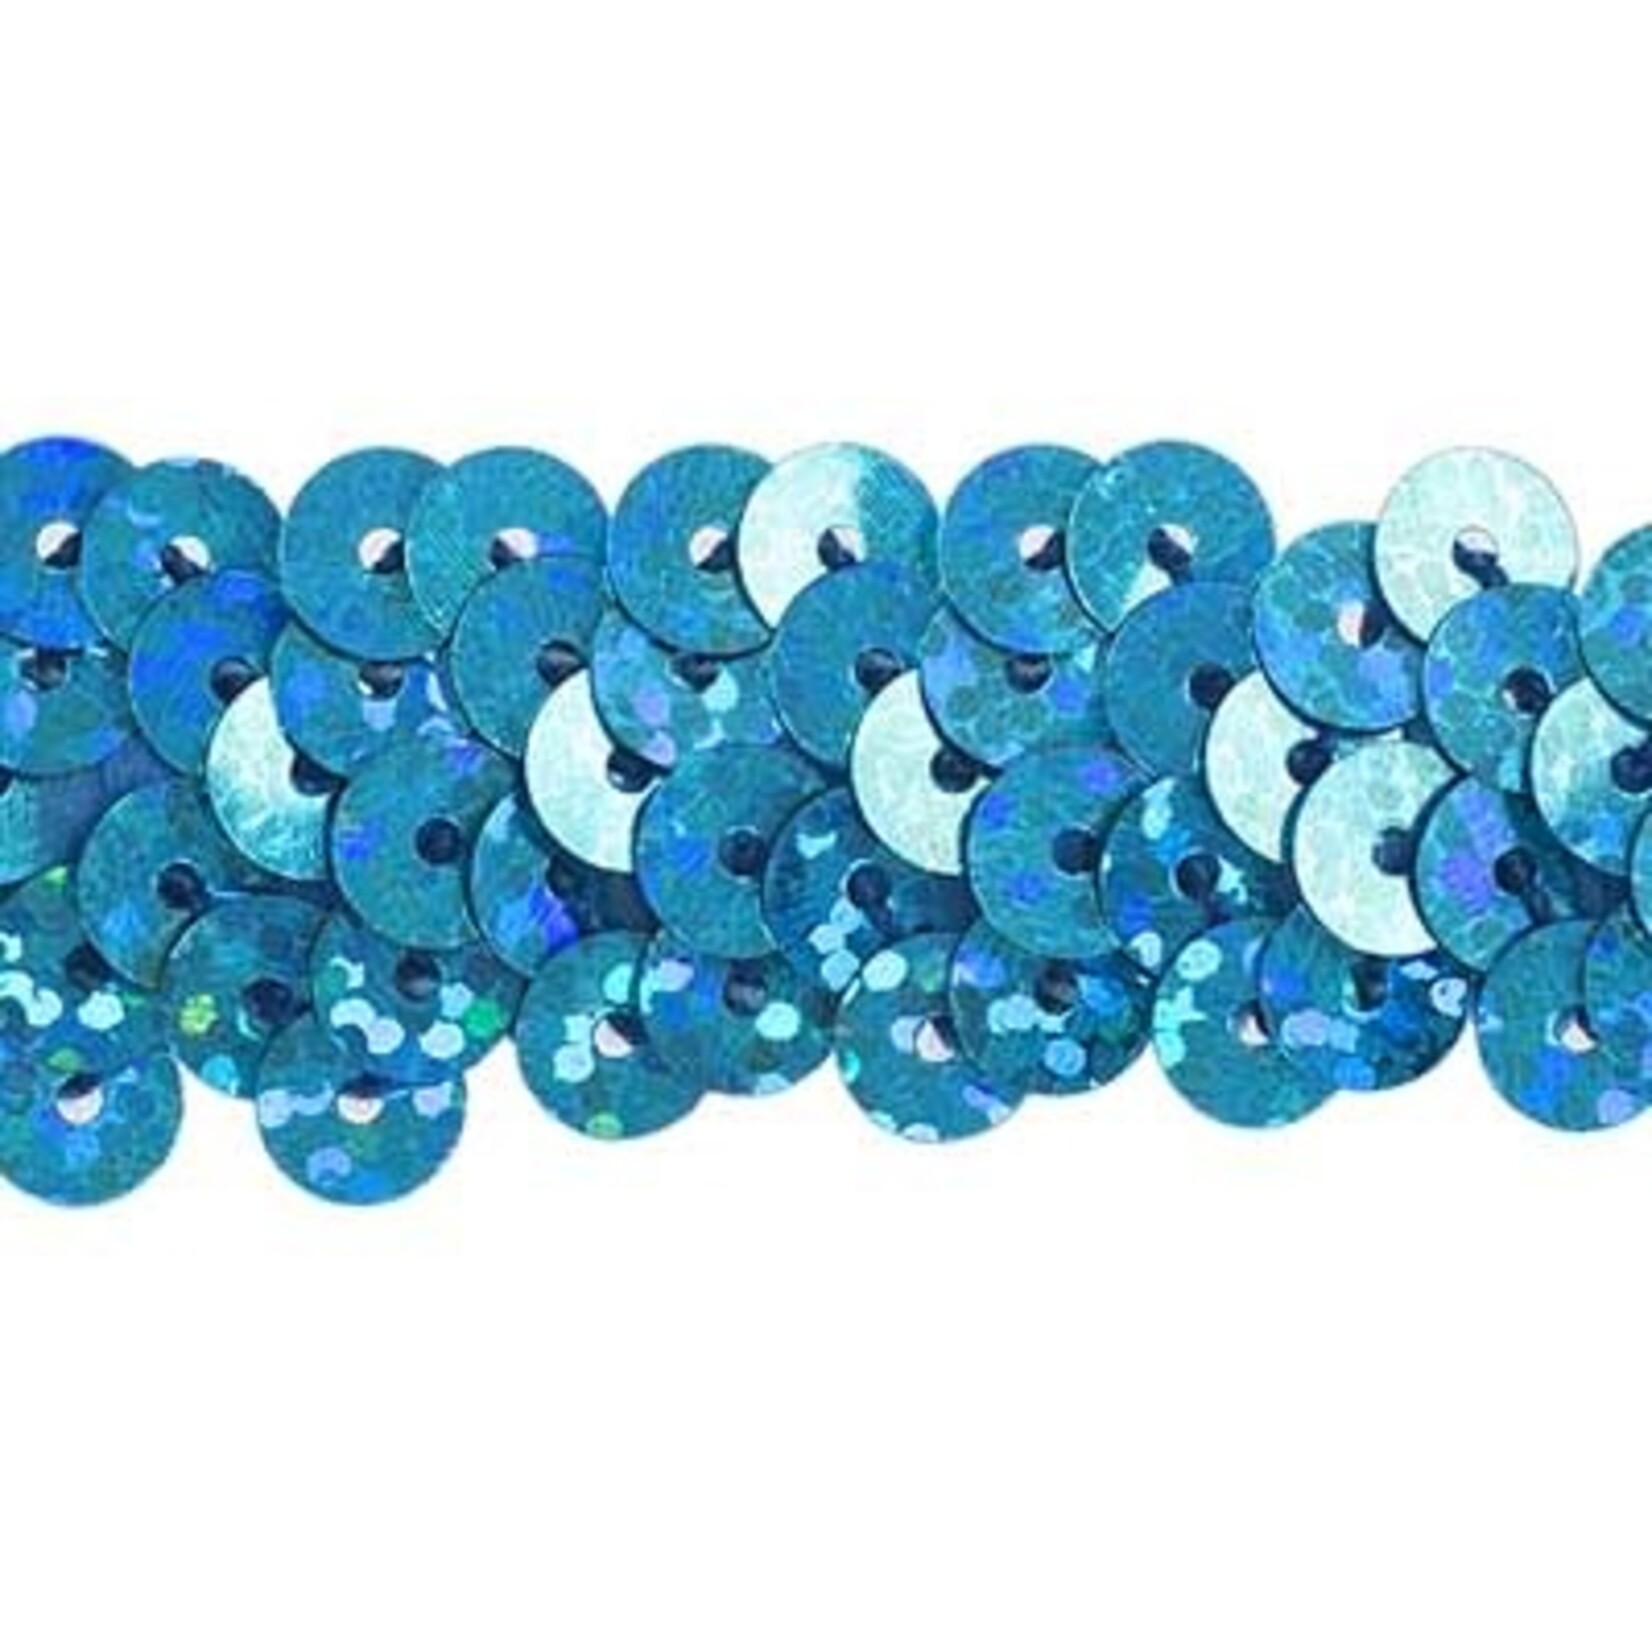 Sequin 6mm Stretch 2 Row